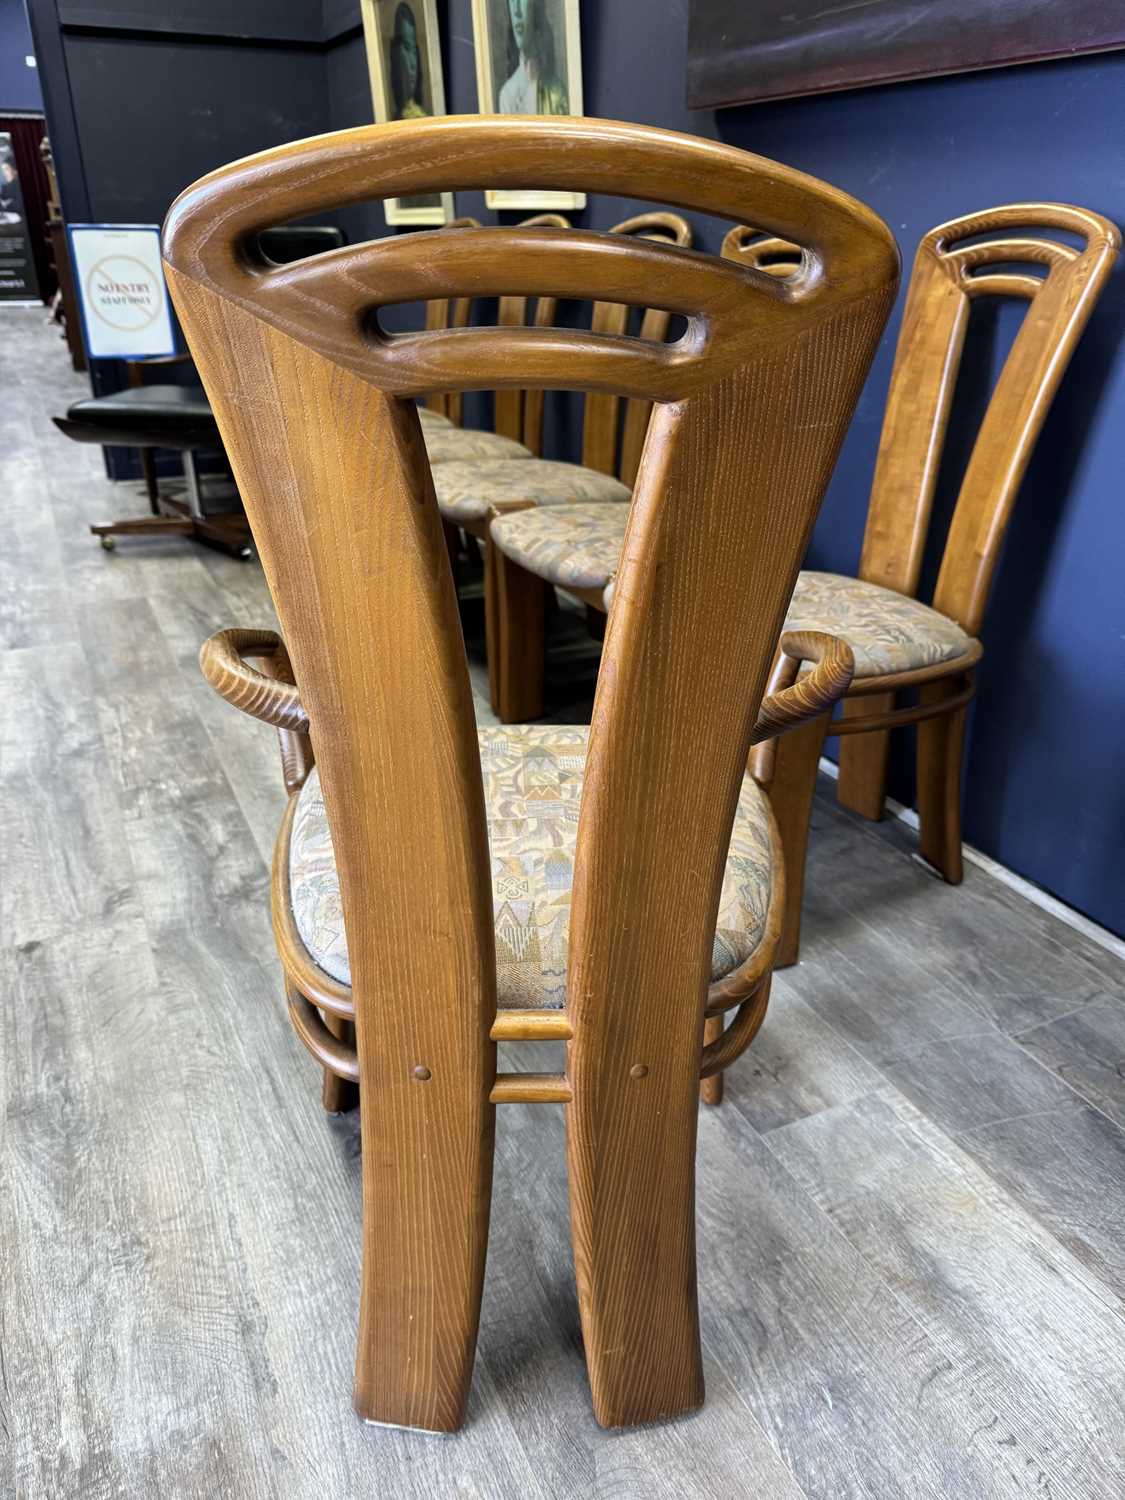 BOLTINGE OF DENMARK, SET OF SIX POST-MODERN TEAK DINING CHAIRS, CIRCA 1980s - Image 6 of 16